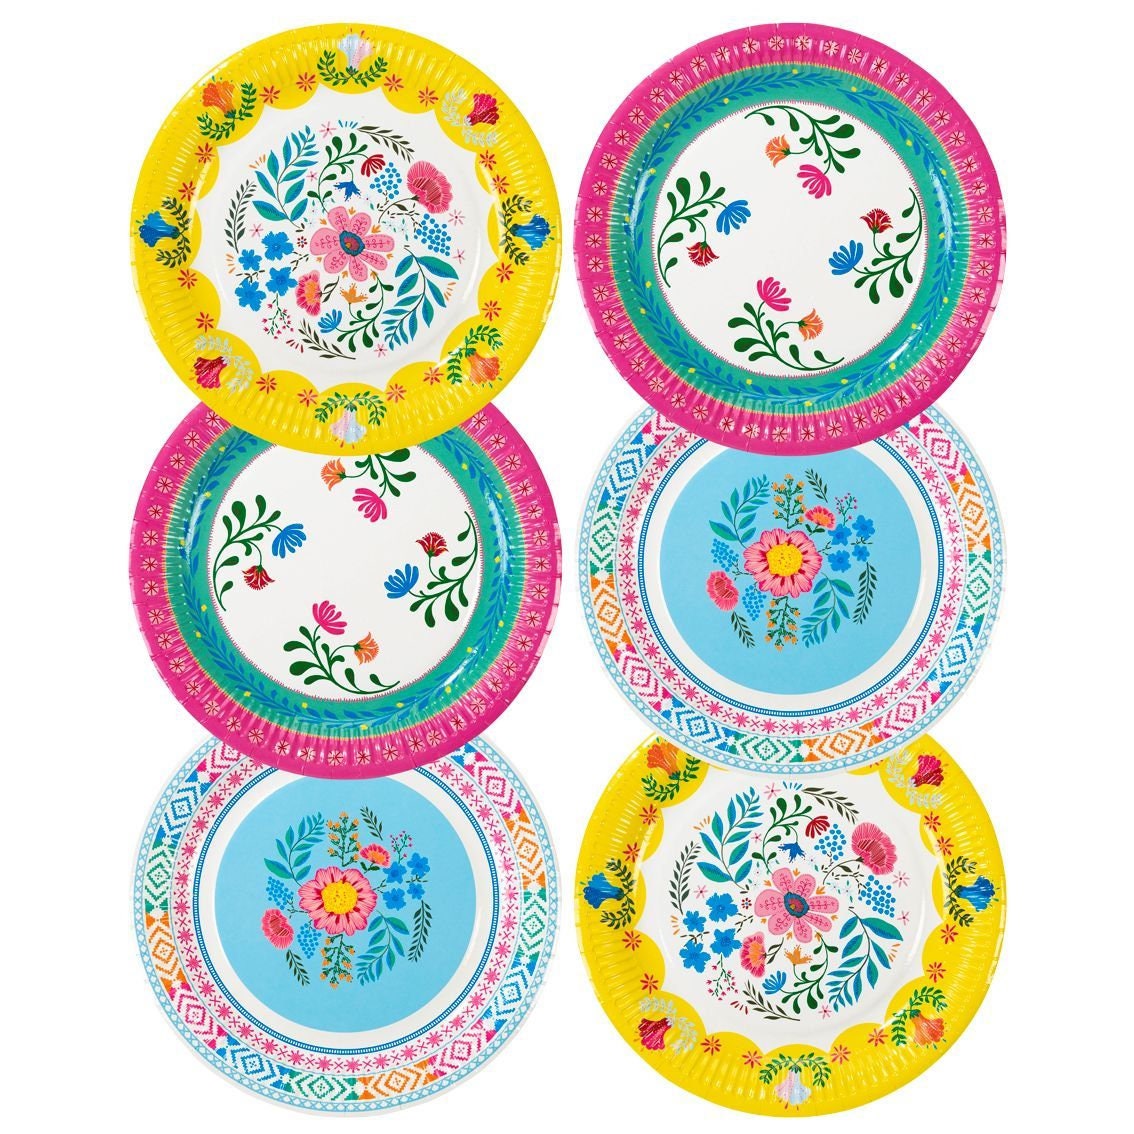 Mexican Themed Fiesta Party Supplies,161pcs Mexican Party Paper Tableware  Set Includes Mexican Fiesta Plates Cups Napkins Tablecloth and Banner etc